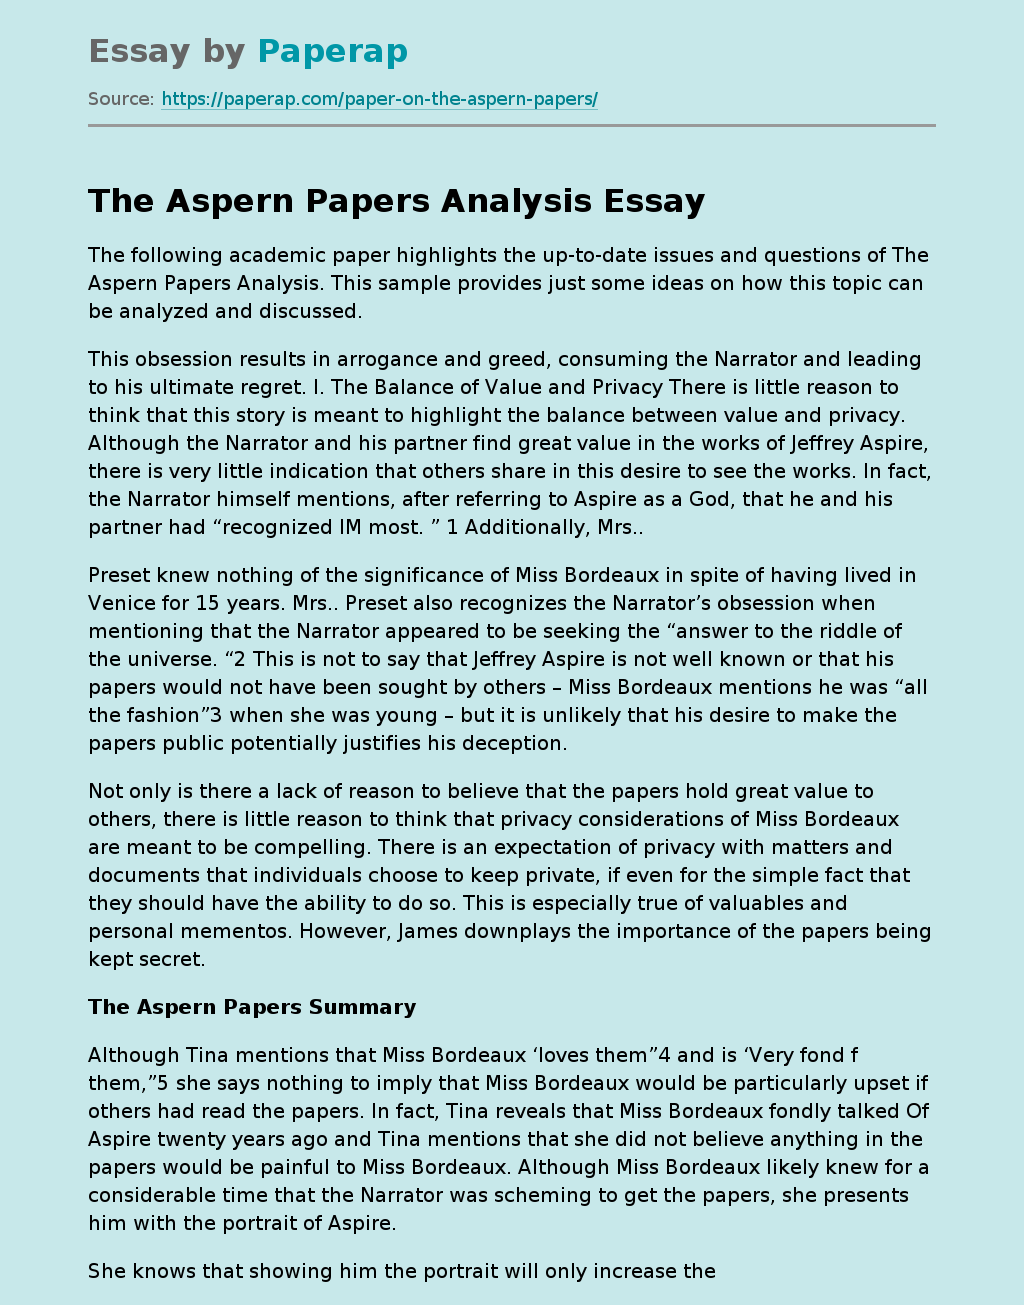 The Aspern Papers Analysis